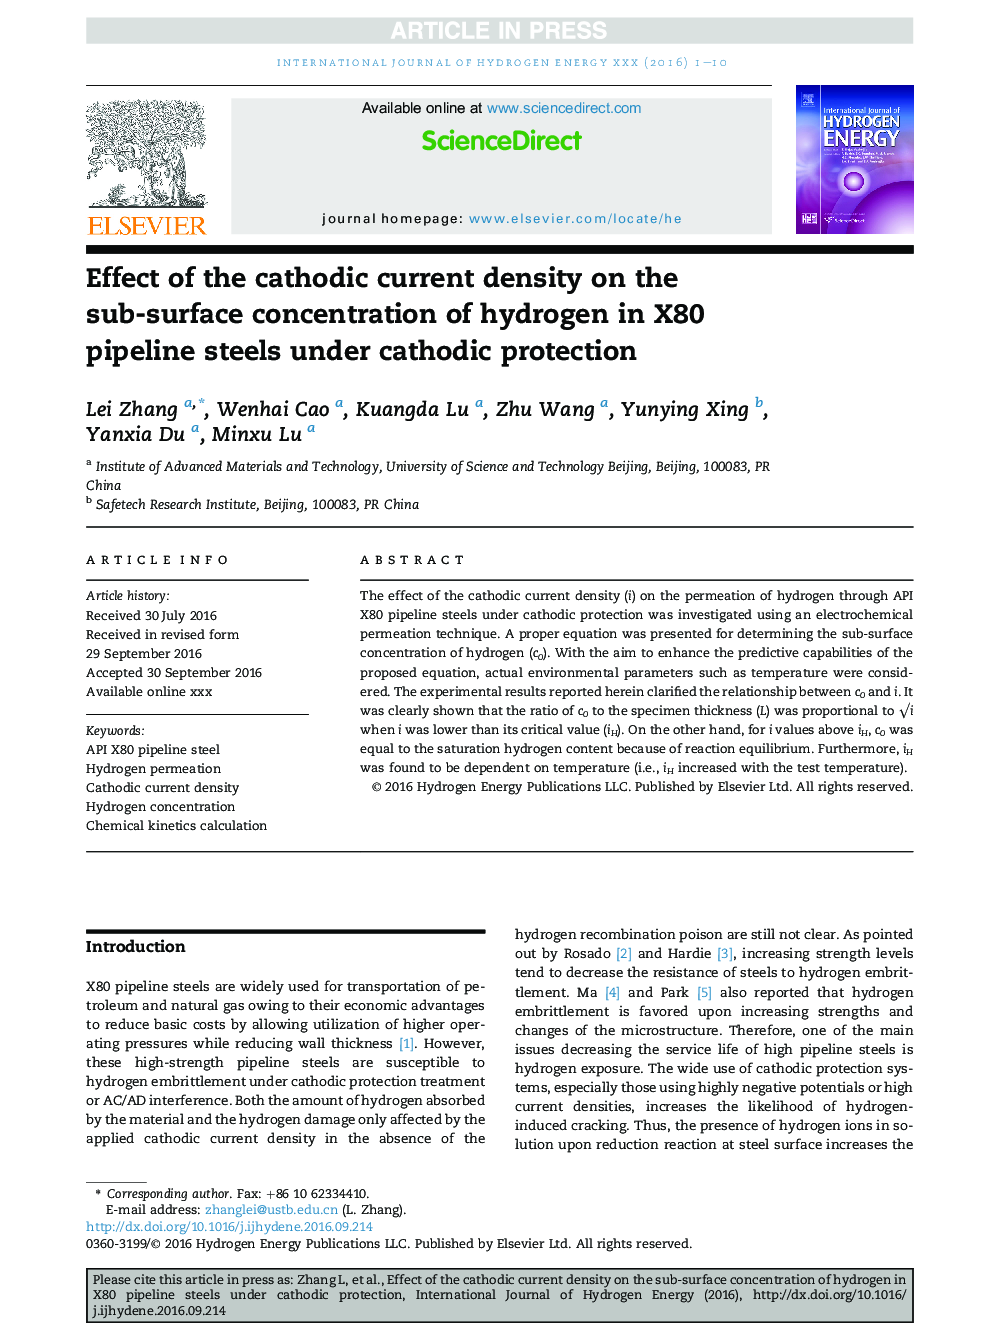 Effect of the cathodic current density on the sub-surface concentration of hydrogen in X80 pipeline steels under cathodic protection